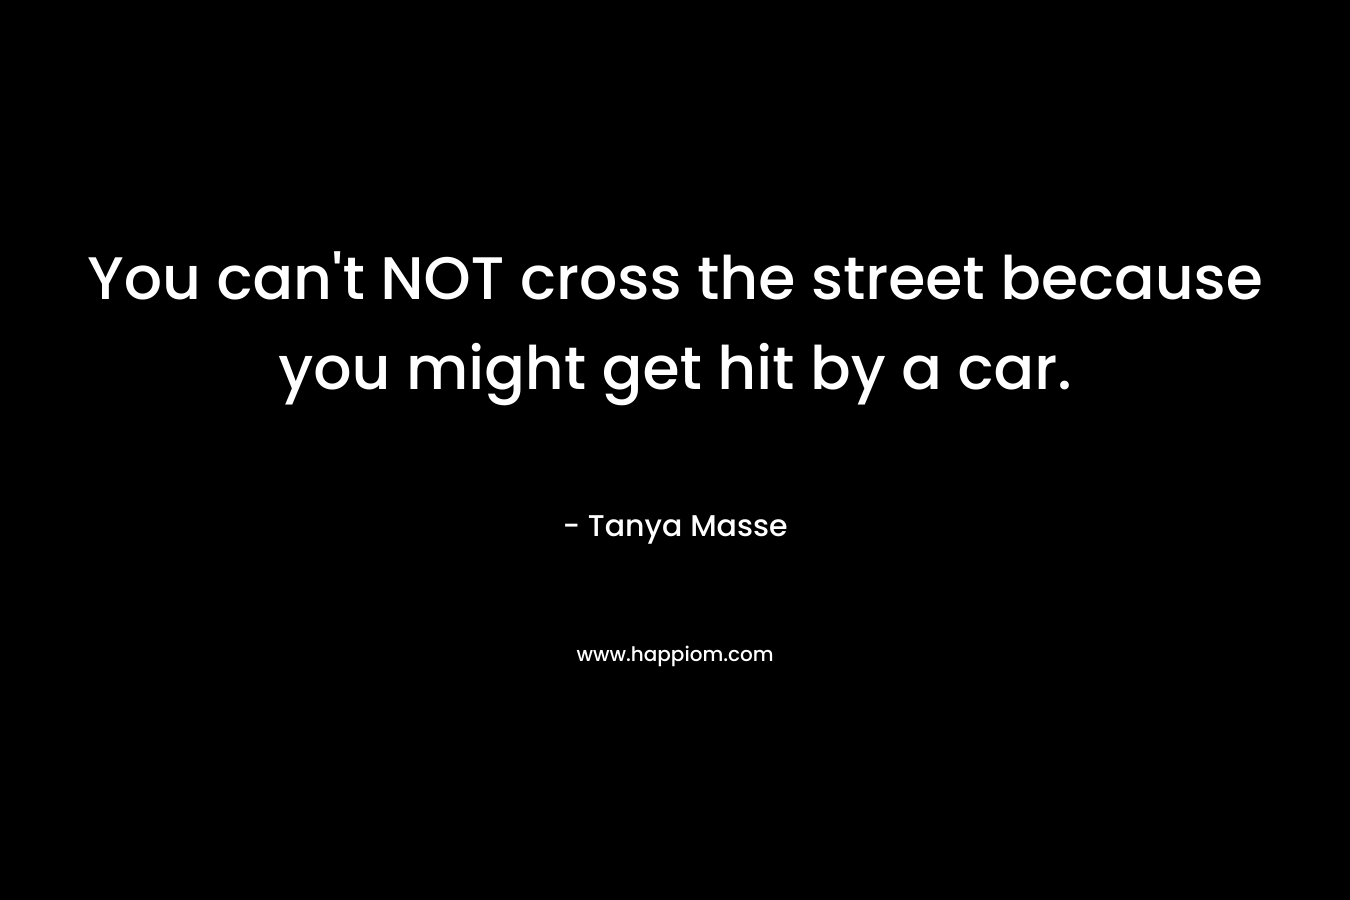 You can't NOT cross the street because you might get hit by a car.